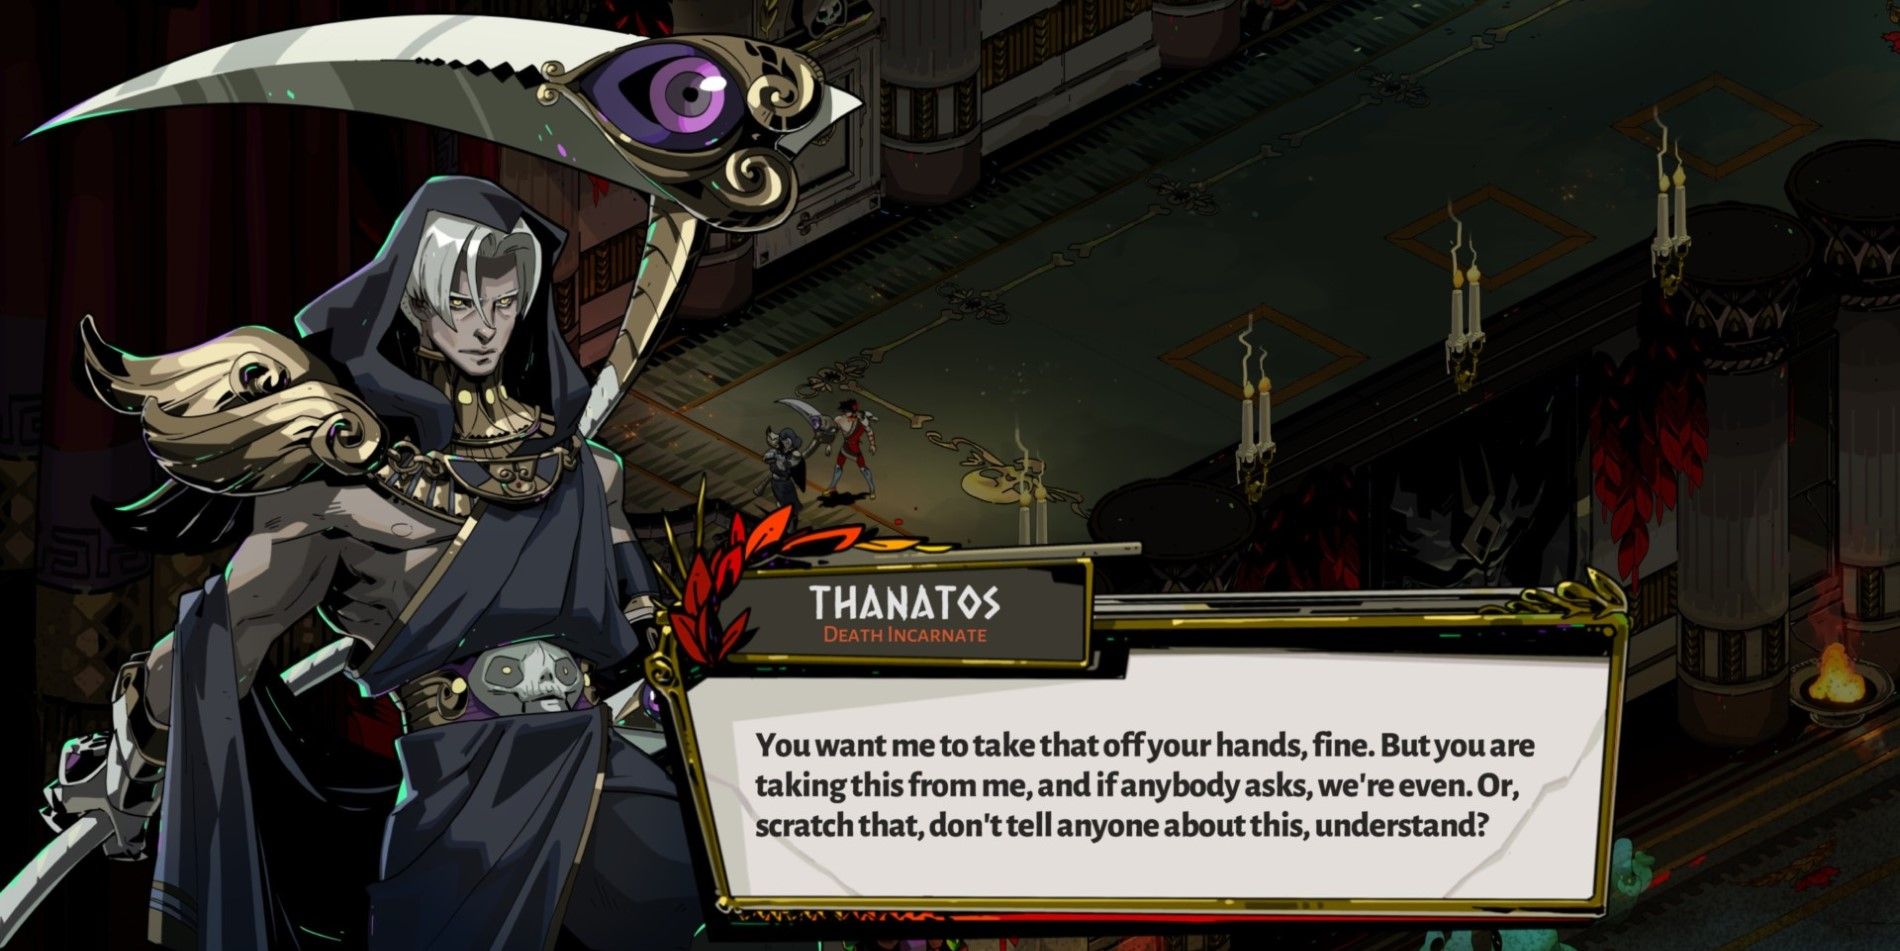 Thanatos from the game Hades talking to Zagreus